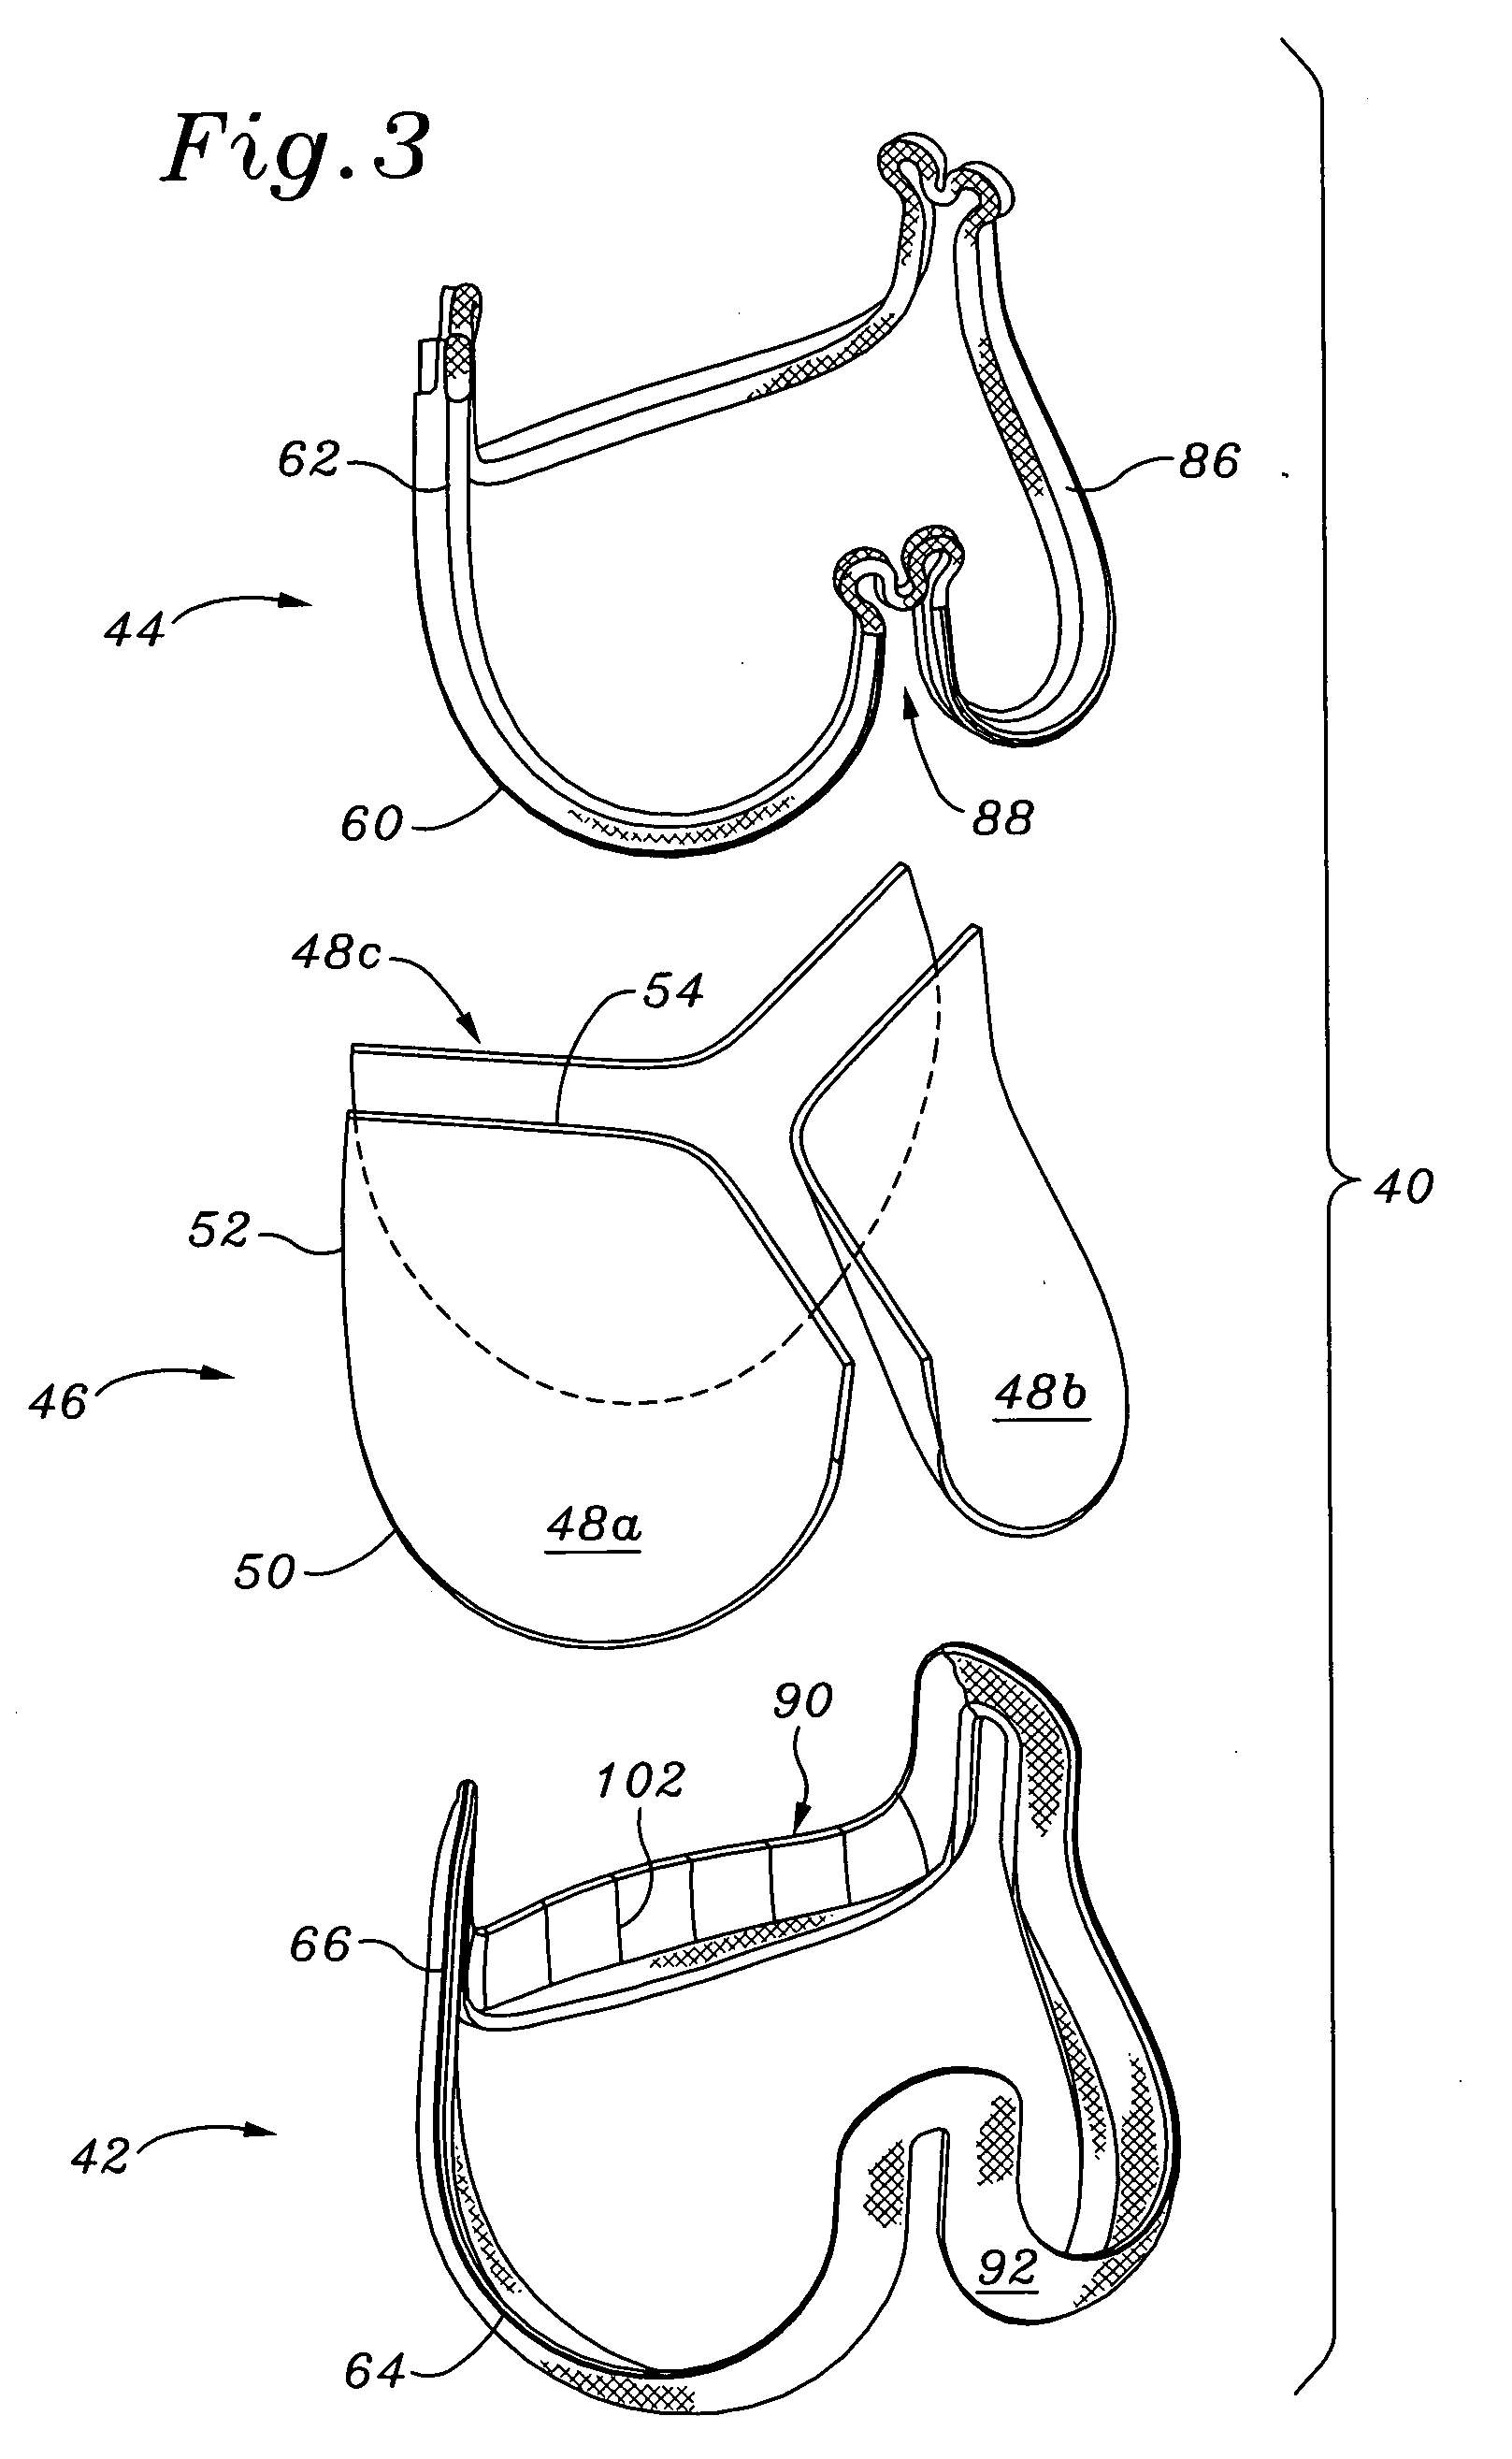 Highly flexible heart valve connecting band